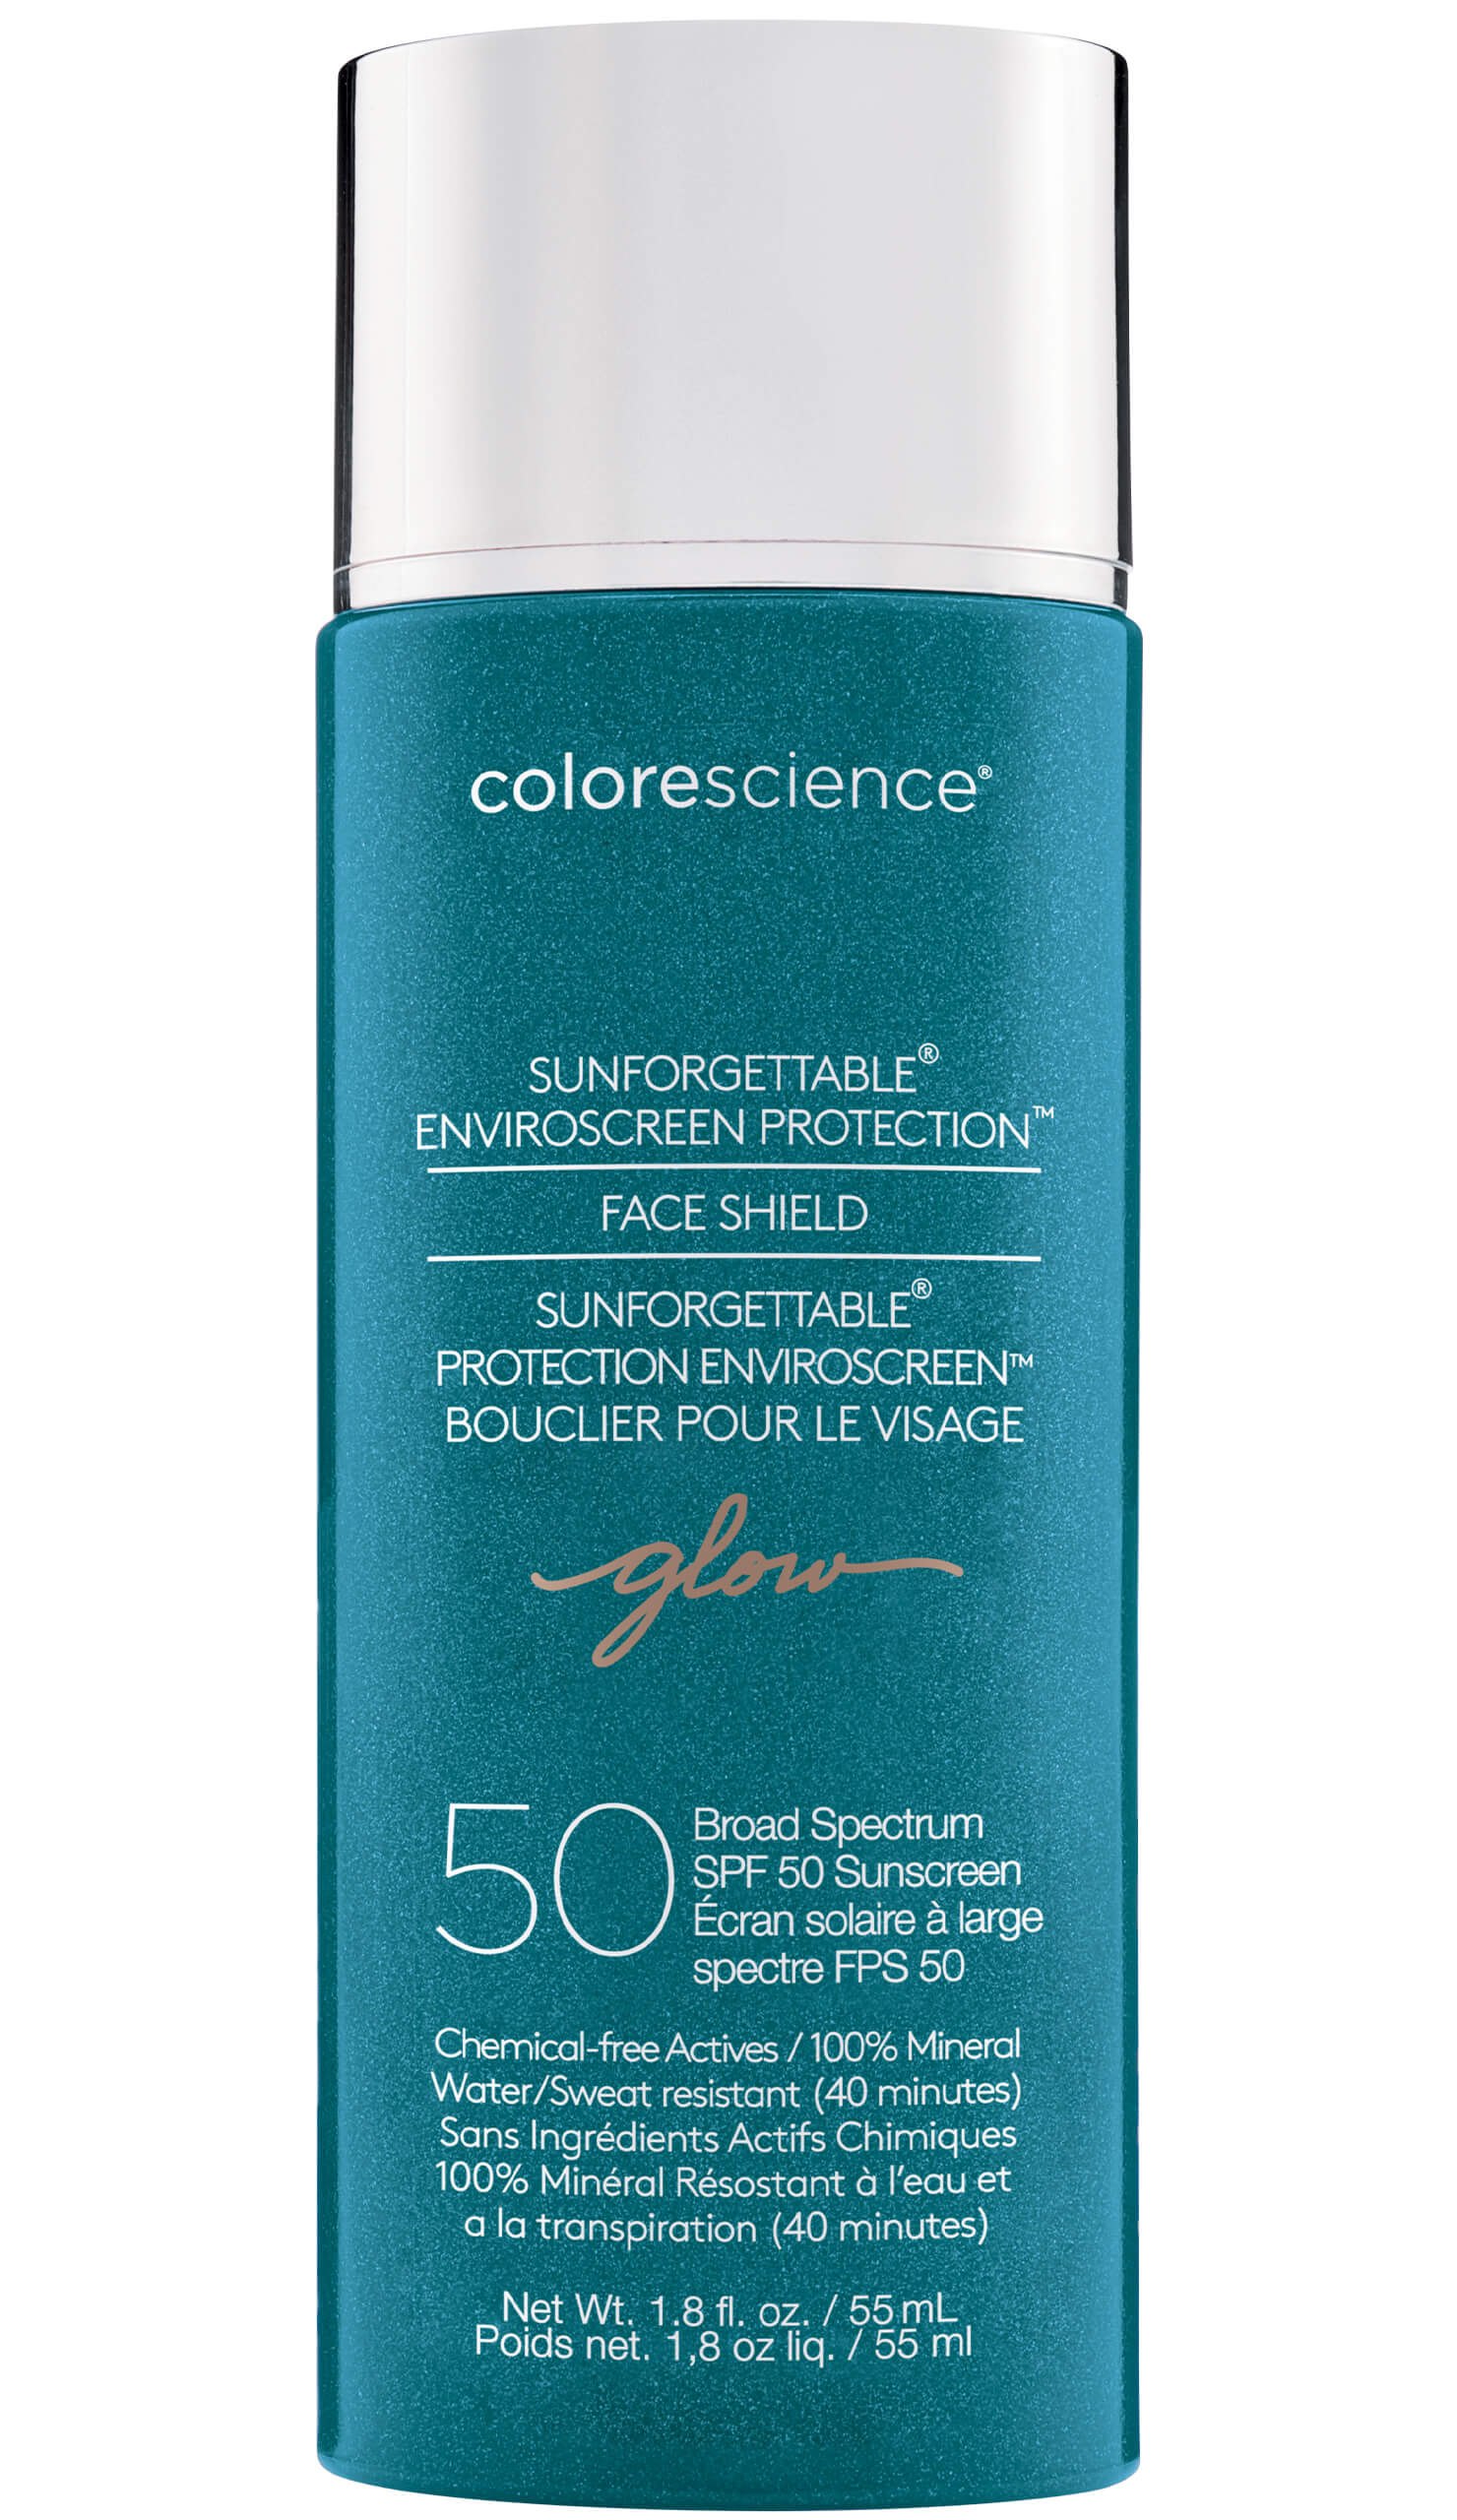 Sunforgettable® Total Protection® Face Shield SPF 50